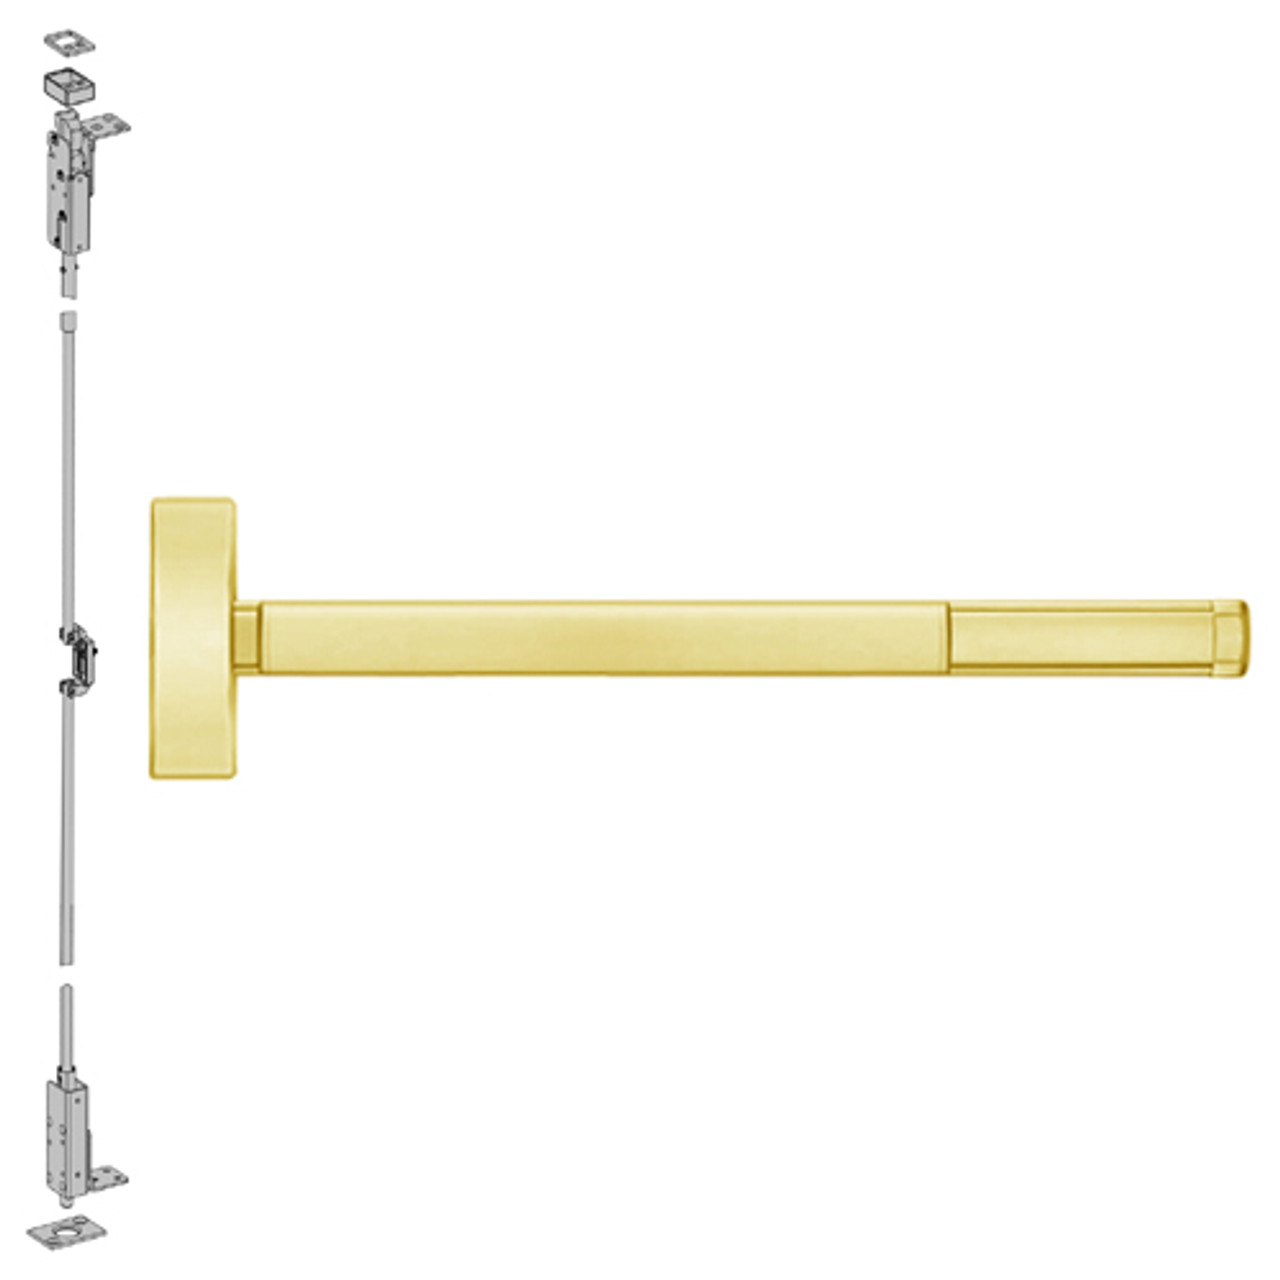 FL2701-605-48 PHI 2700 Series Fire Rated Wood Door Concealed Vertical Exit Device Prepped for Cover Plate in Bright Brass Finish